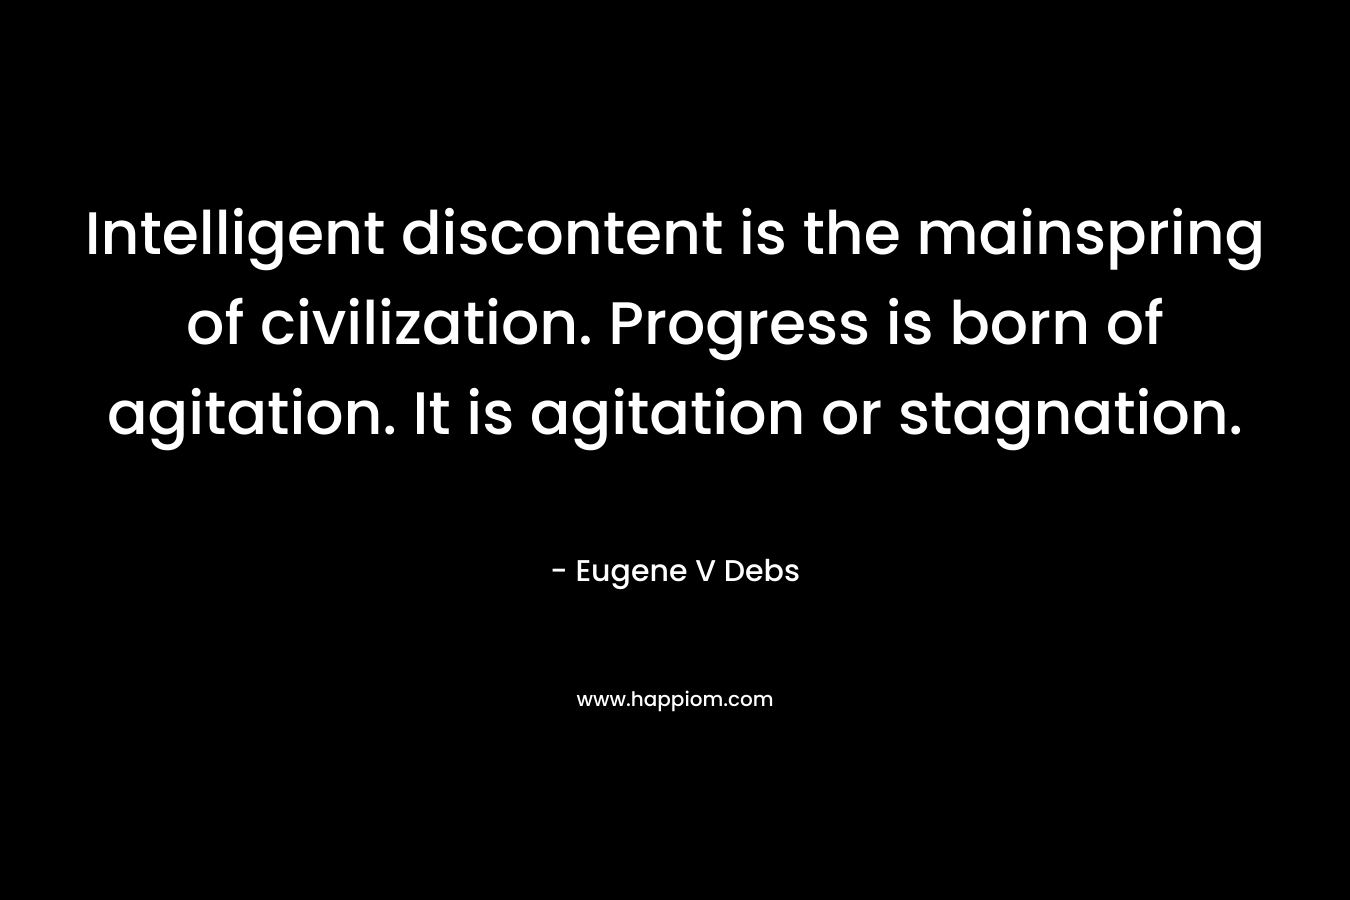 Intelligent discontent is the mainspring of civilization. Progress is born of agitation. It is agitation or stagnation. – Eugene V Debs